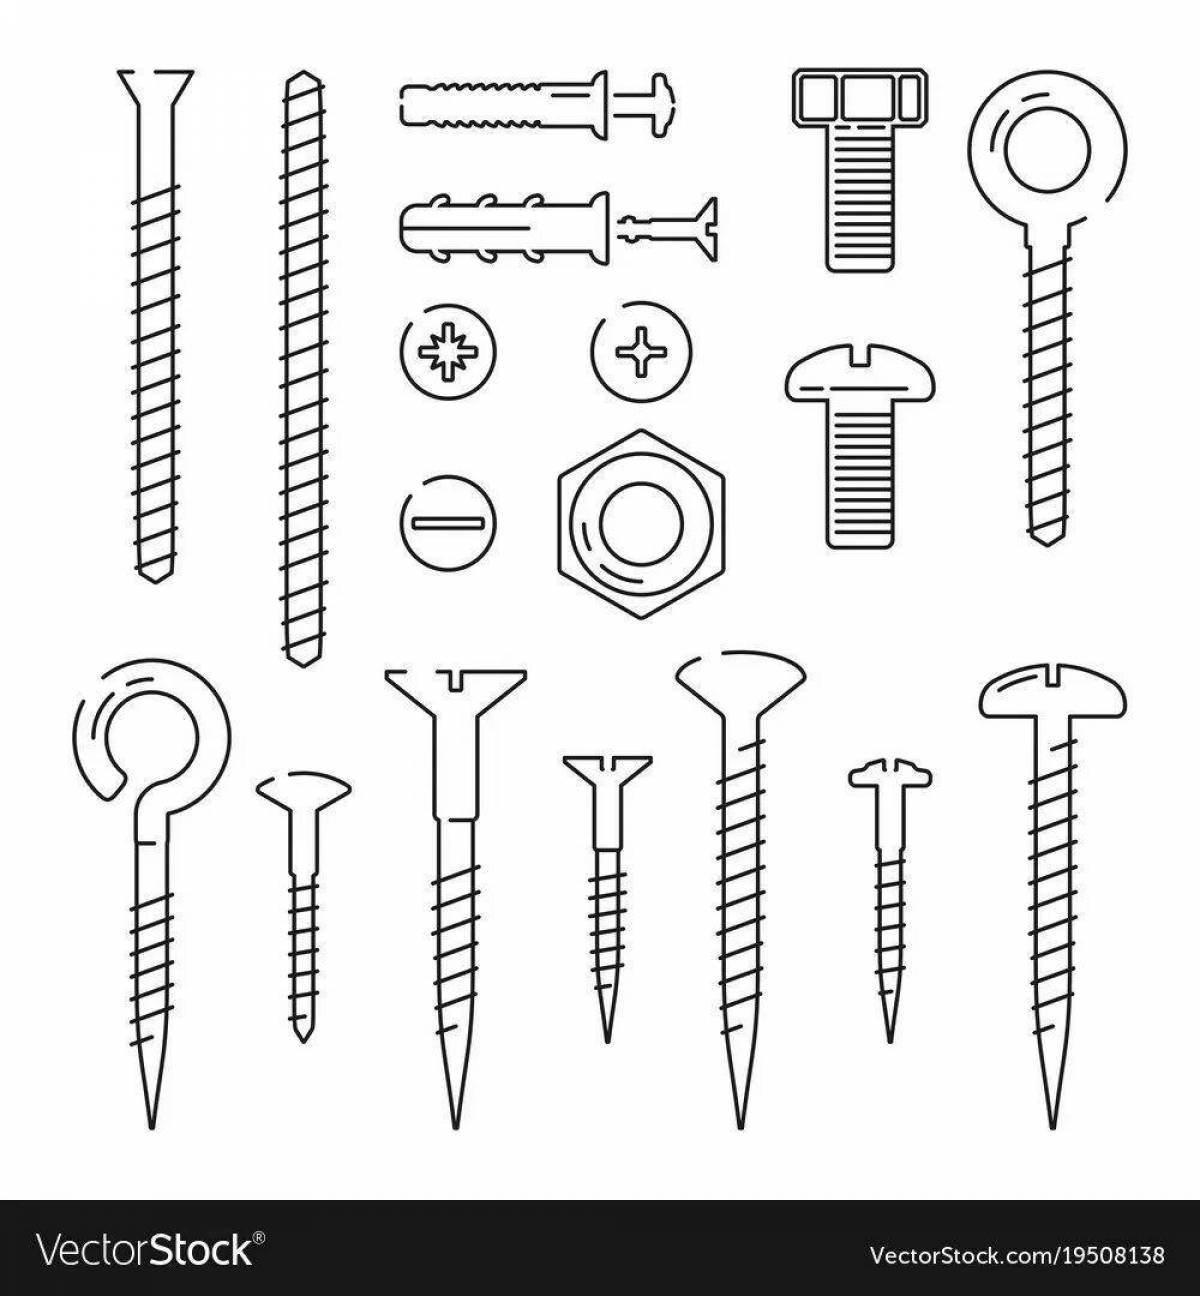 Animated screw coloring page